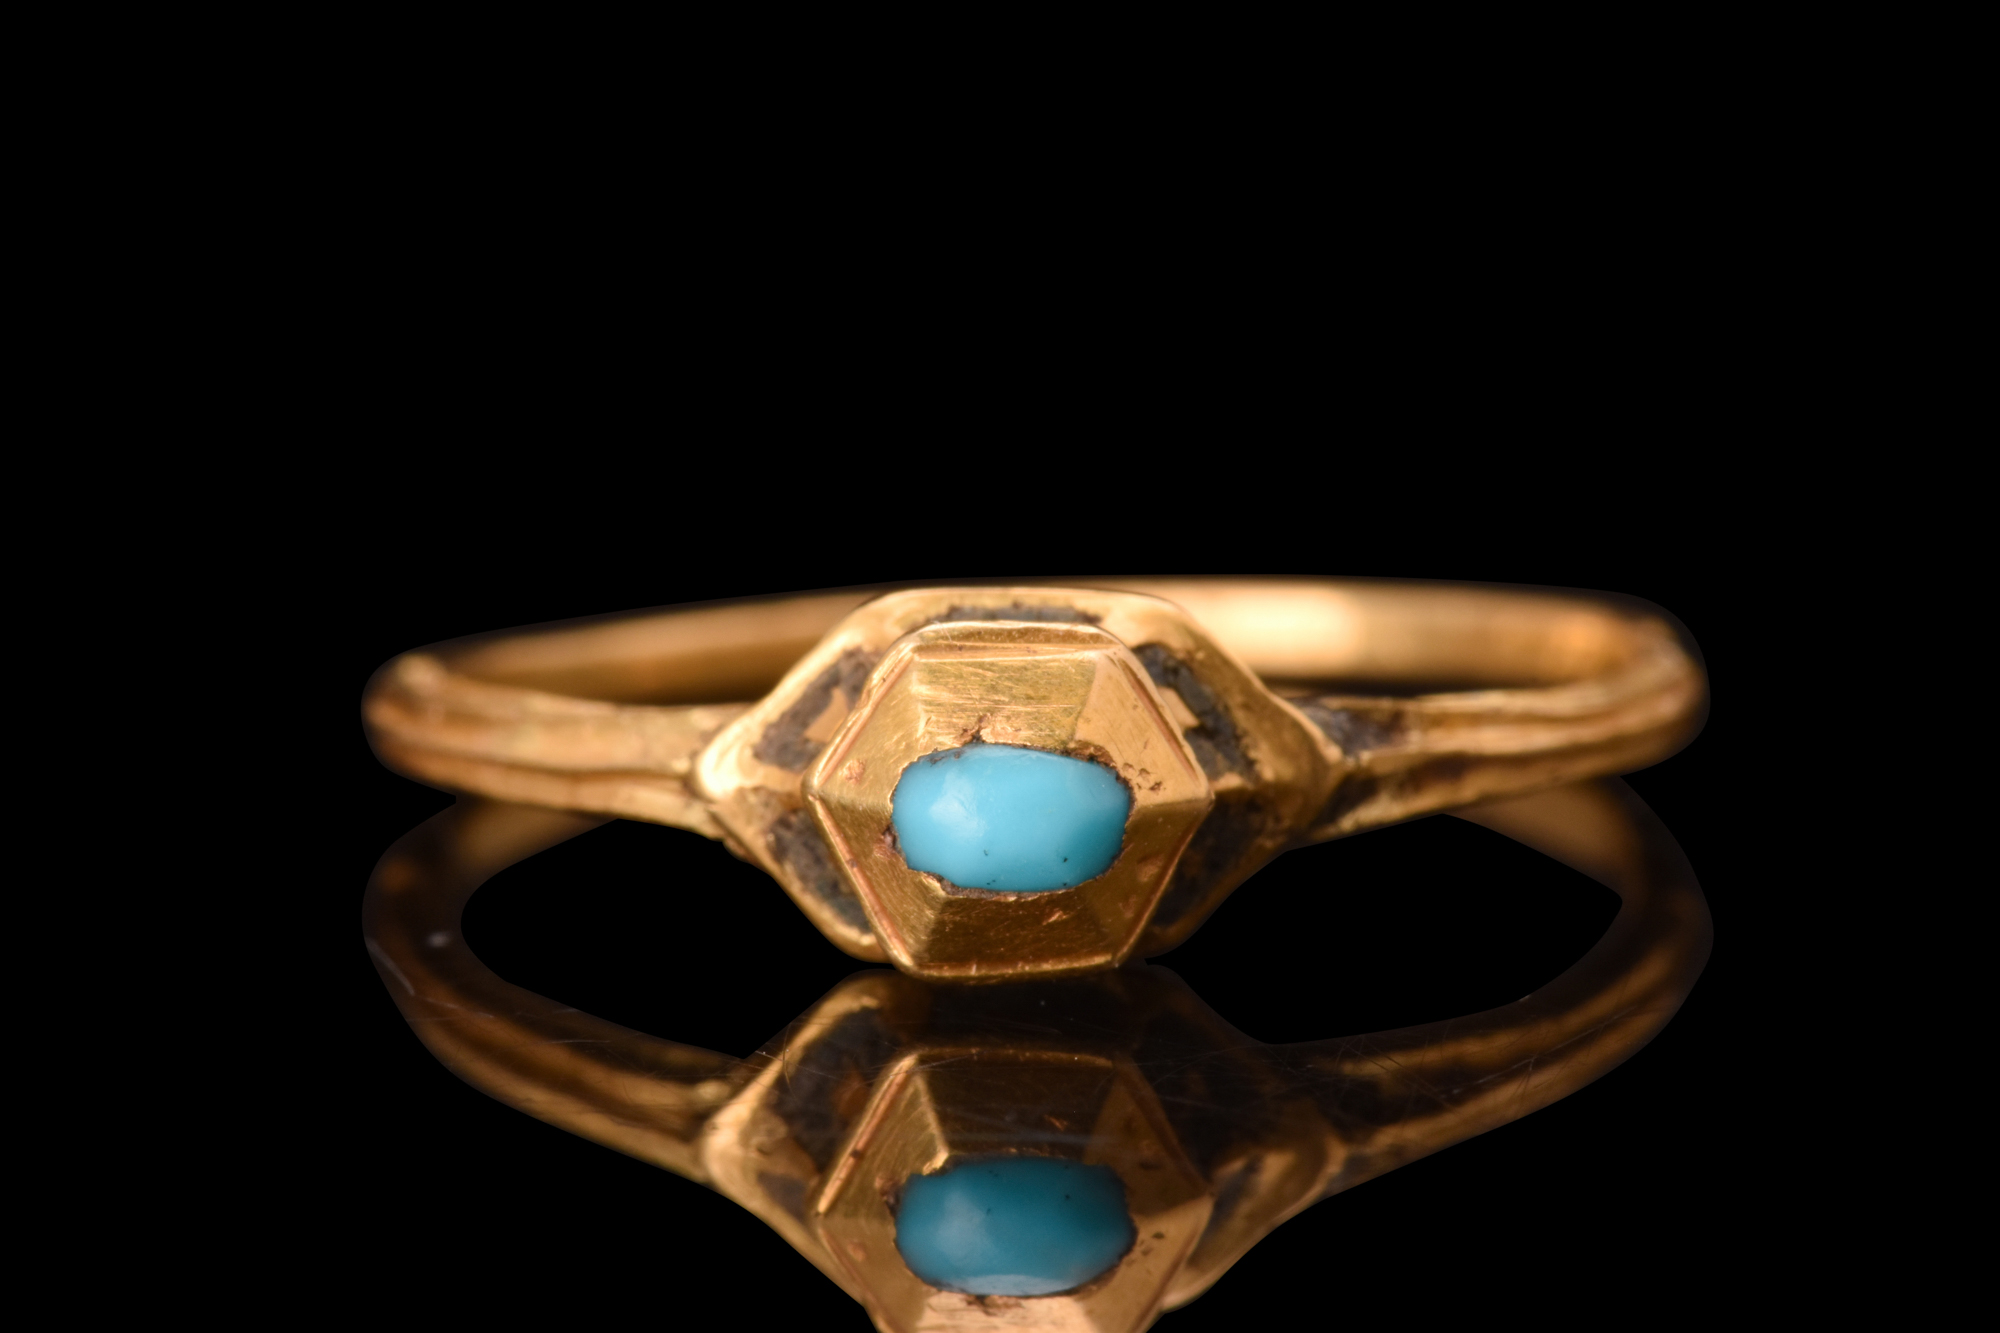 RENAISSANCE GOLD AND TURQUOISE RING - Image 3 of 6